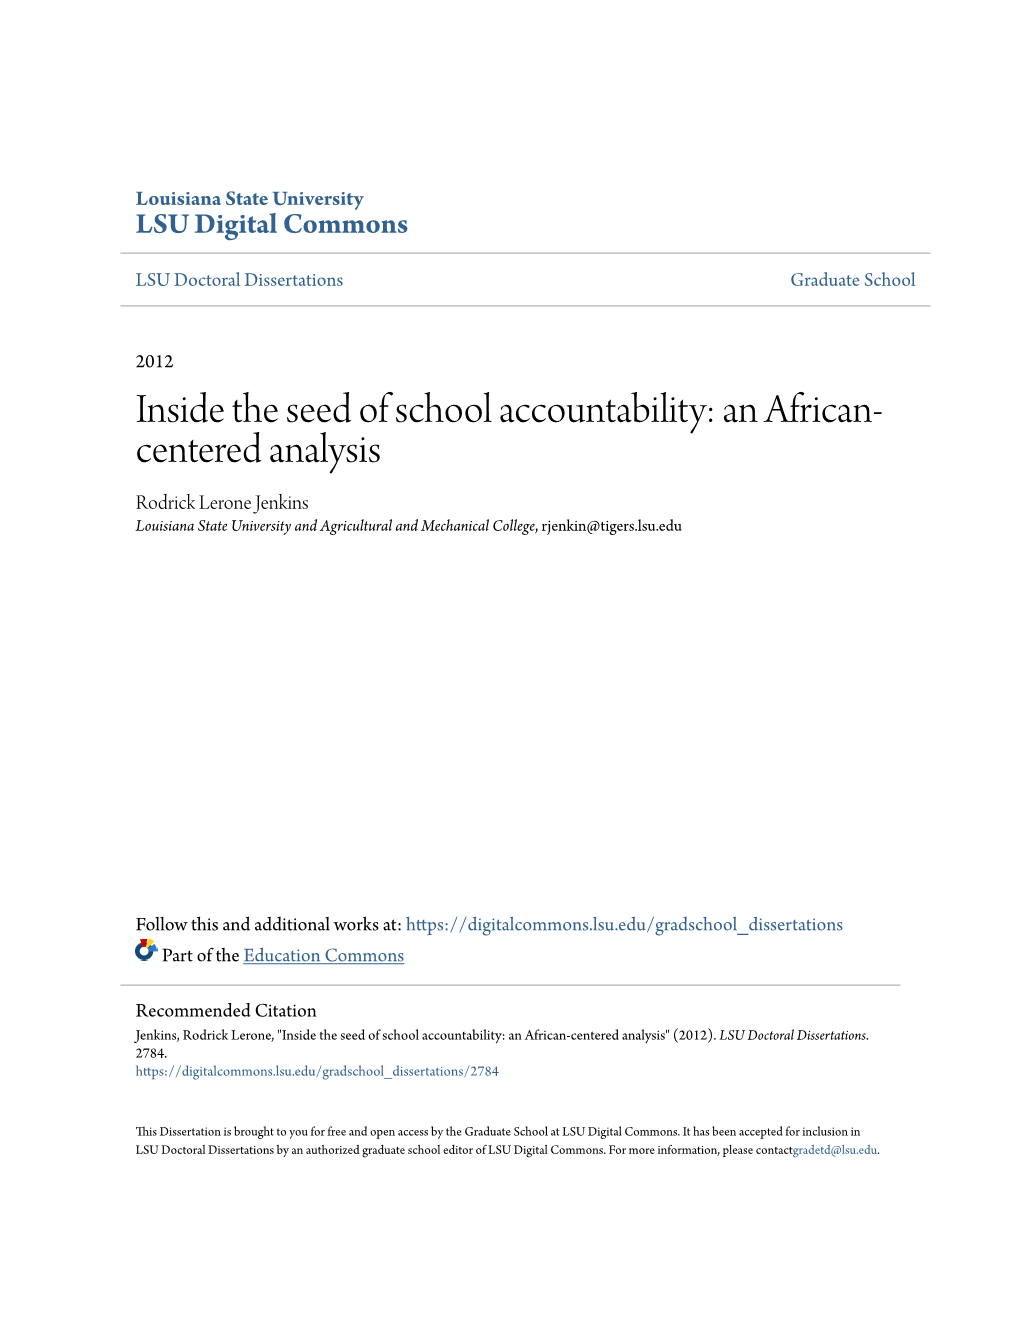 Inside the Seed of School Accountability: an African-Centered Analysis" (2012)